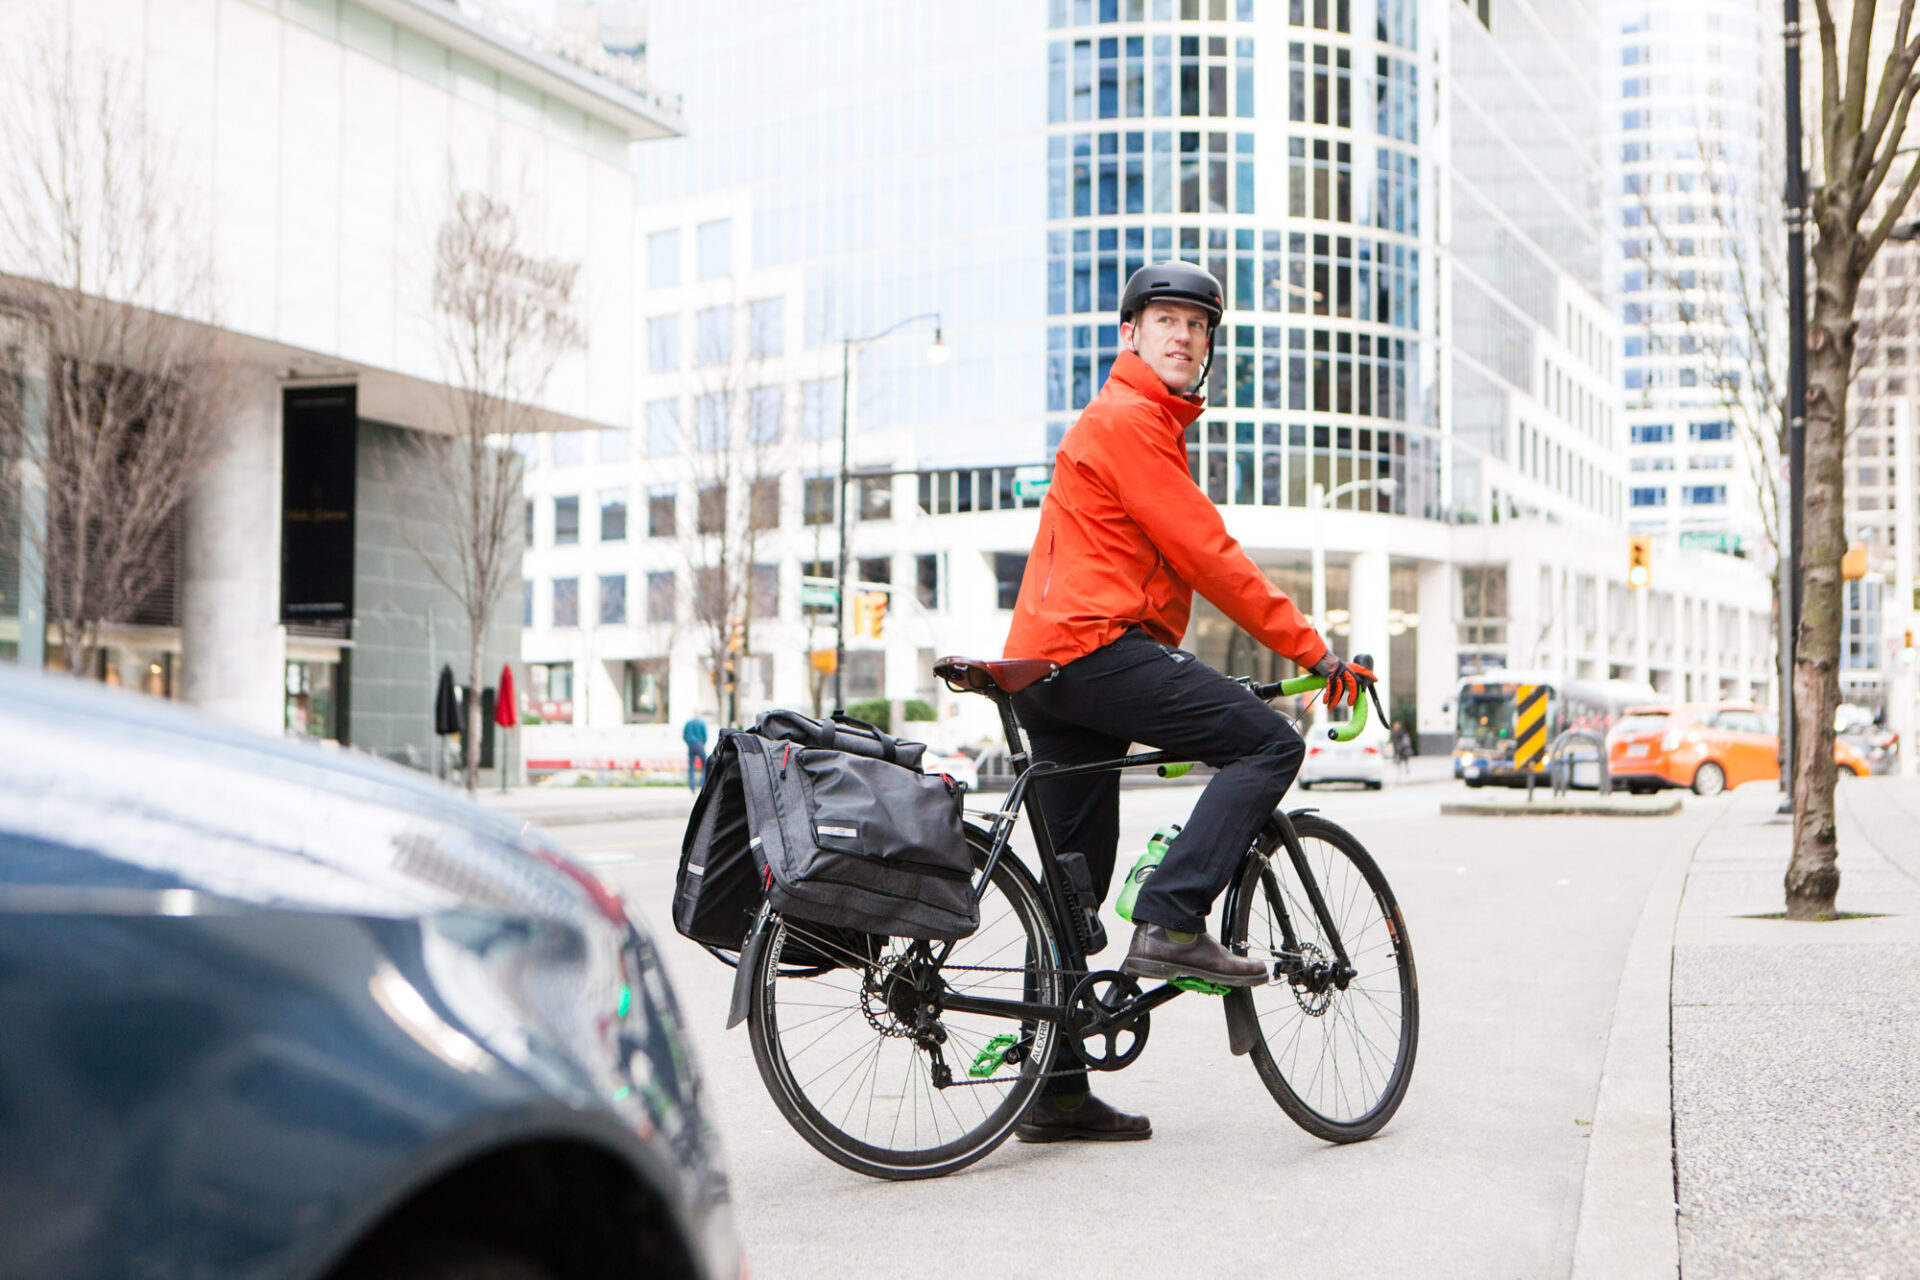 A man on his bicycle does a shoulder check in traffic in downtown Vancouver.